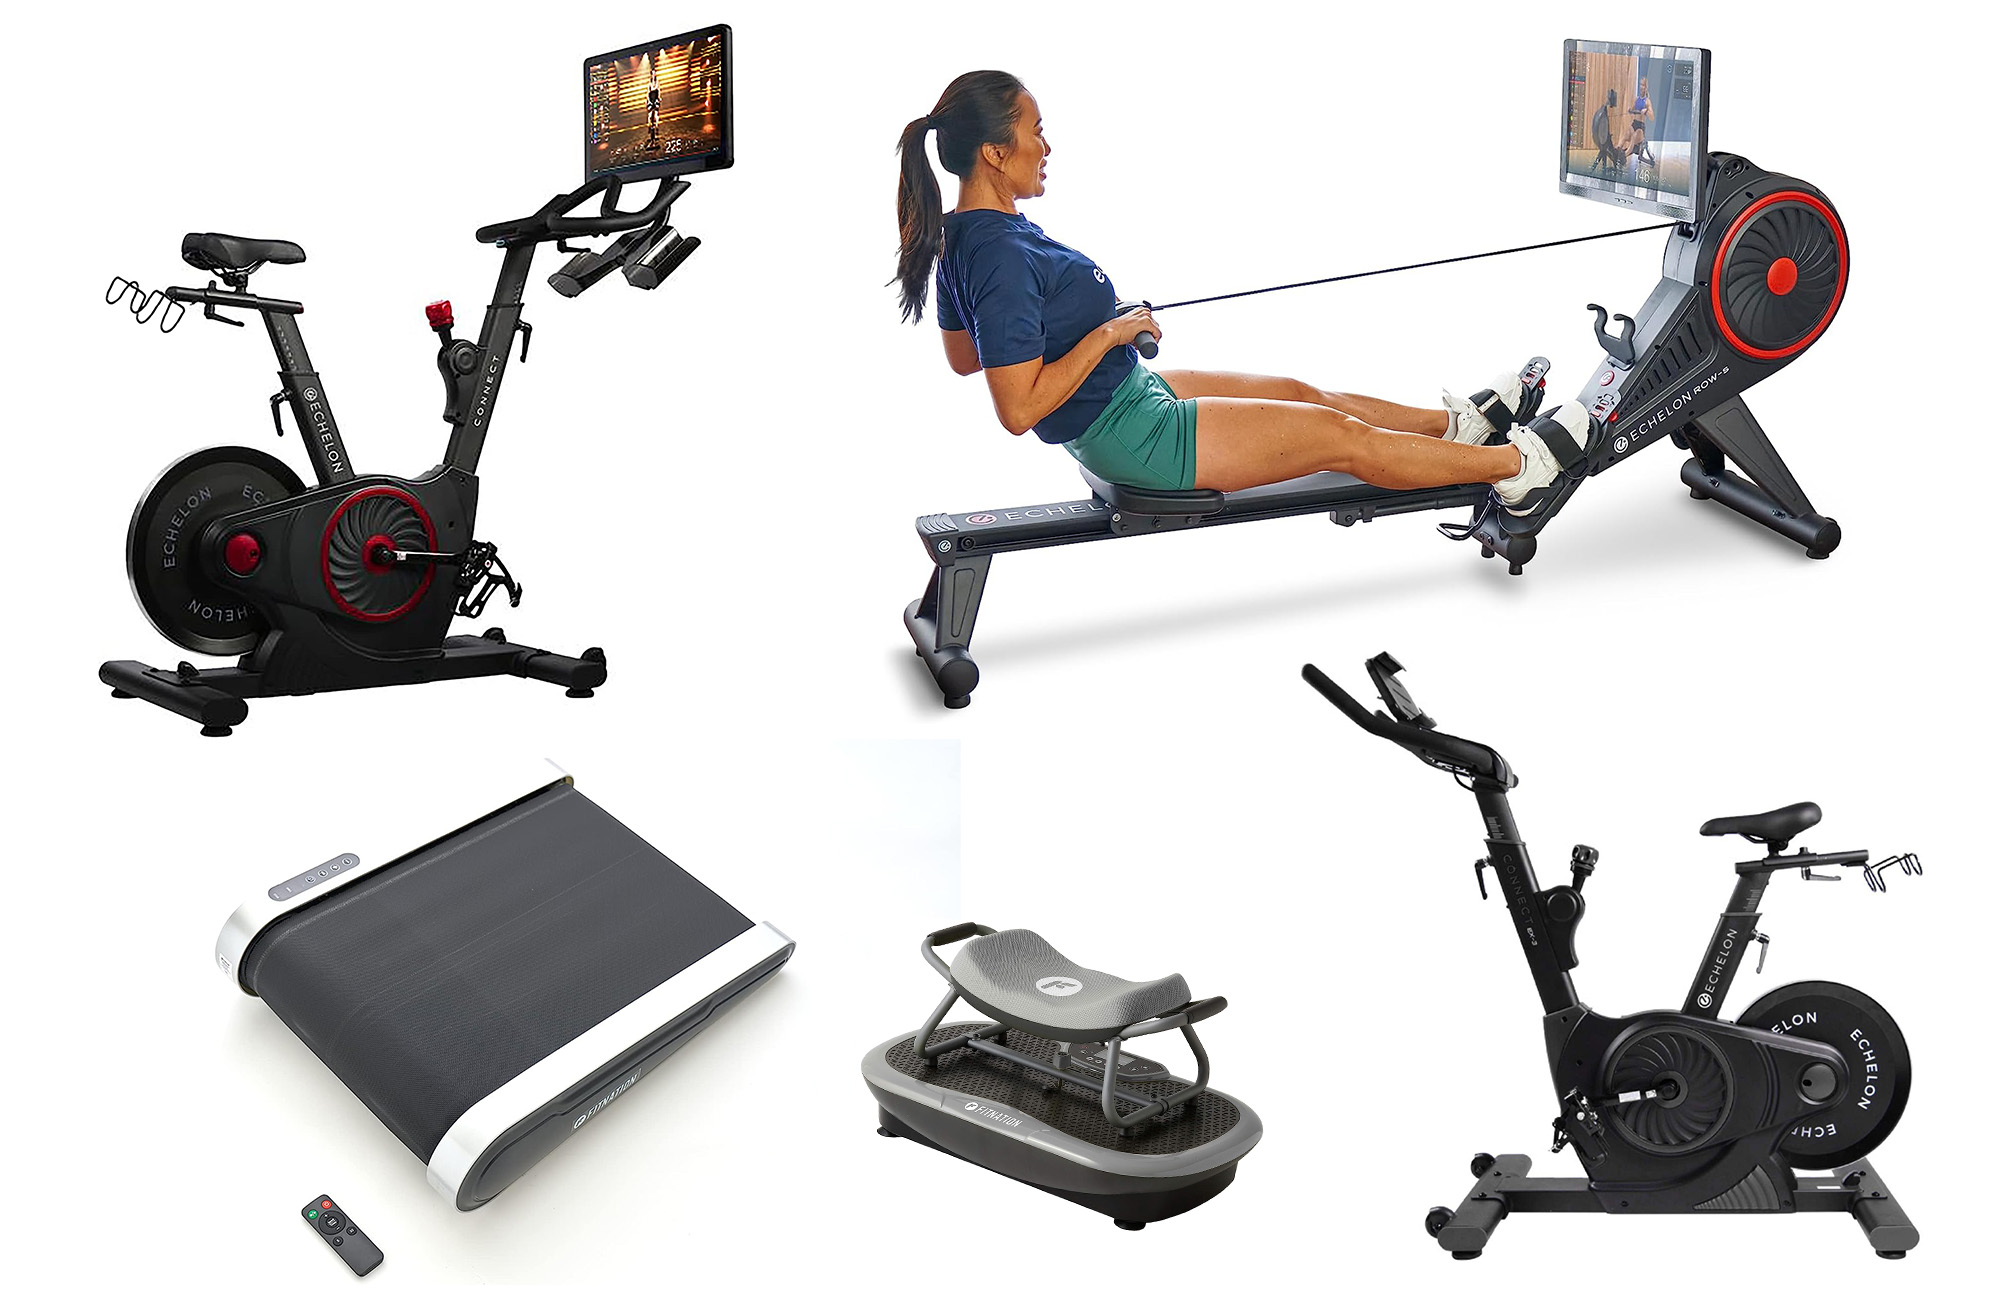 Save up to $400 with these last-minute deals on Echelon smart bikes, rowing machines, & more